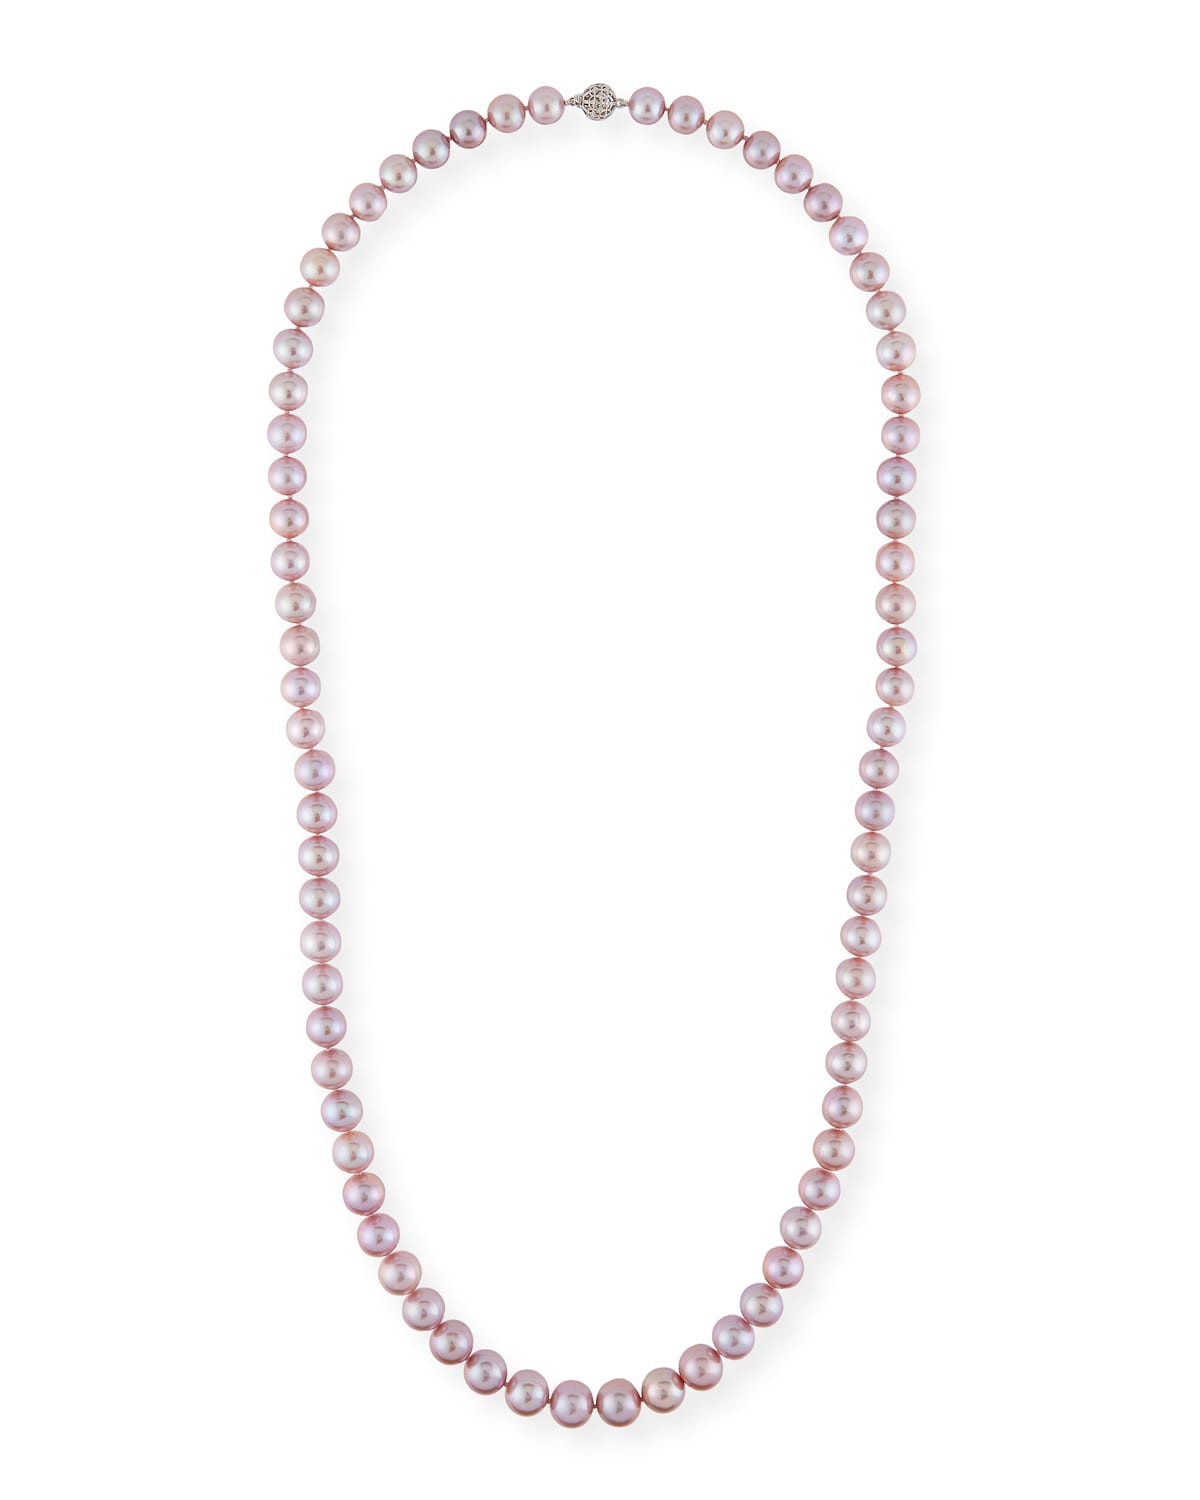 Belpearl Long Kasumiga Pearls Necklace w/ 18k White Gold, Pink